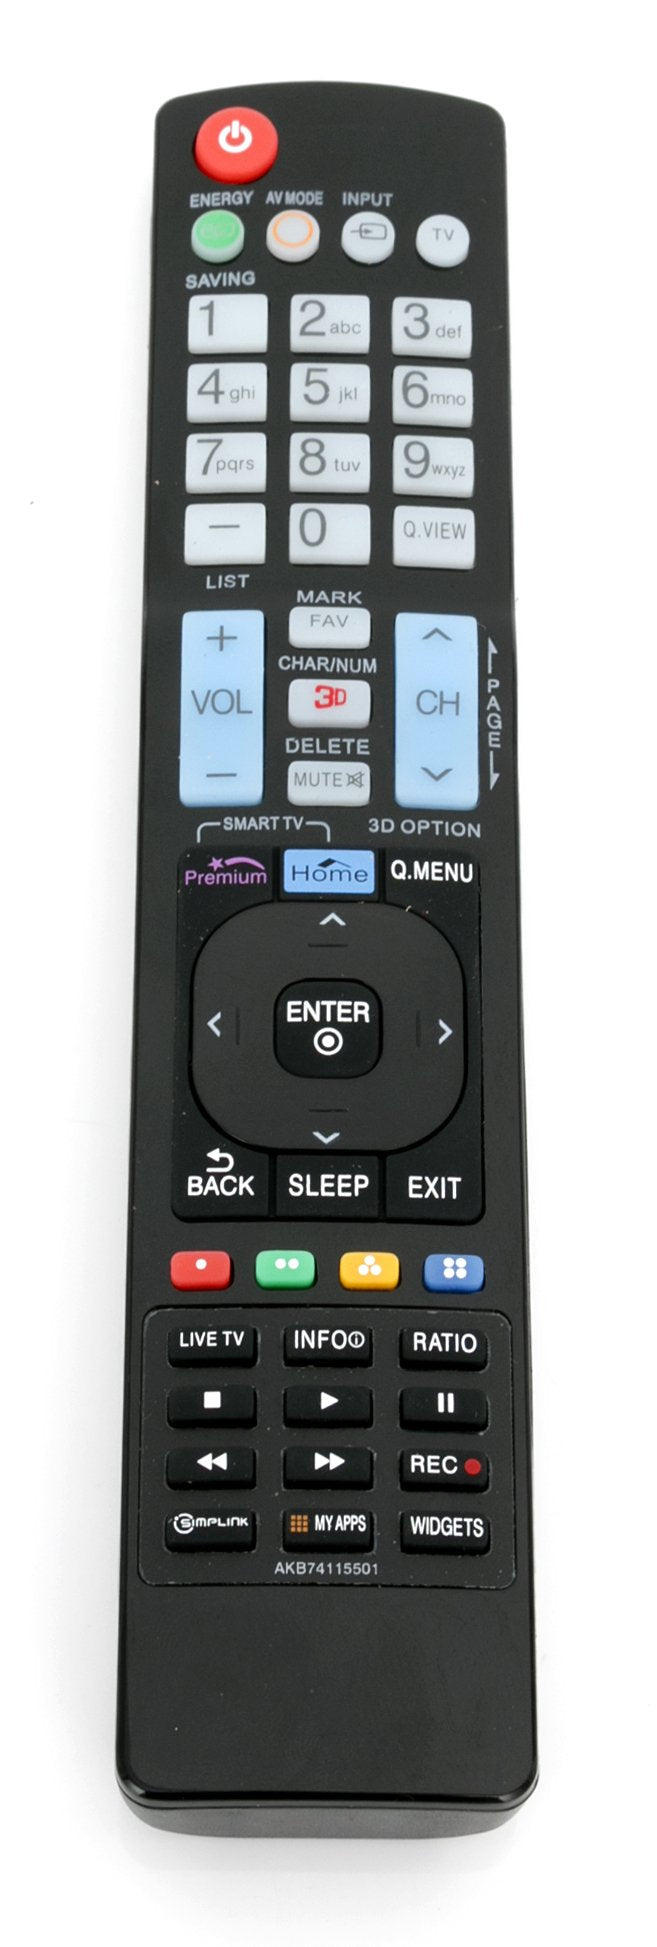 New AKB74115501 Lost Replacement Remote Control for LG LED Smart TV AGF76692626 AKB73756567 AKB73756506 AKB76631001 AKB72915206 AKB72914207 AKB69680409 AKB73615321 AKB73615337